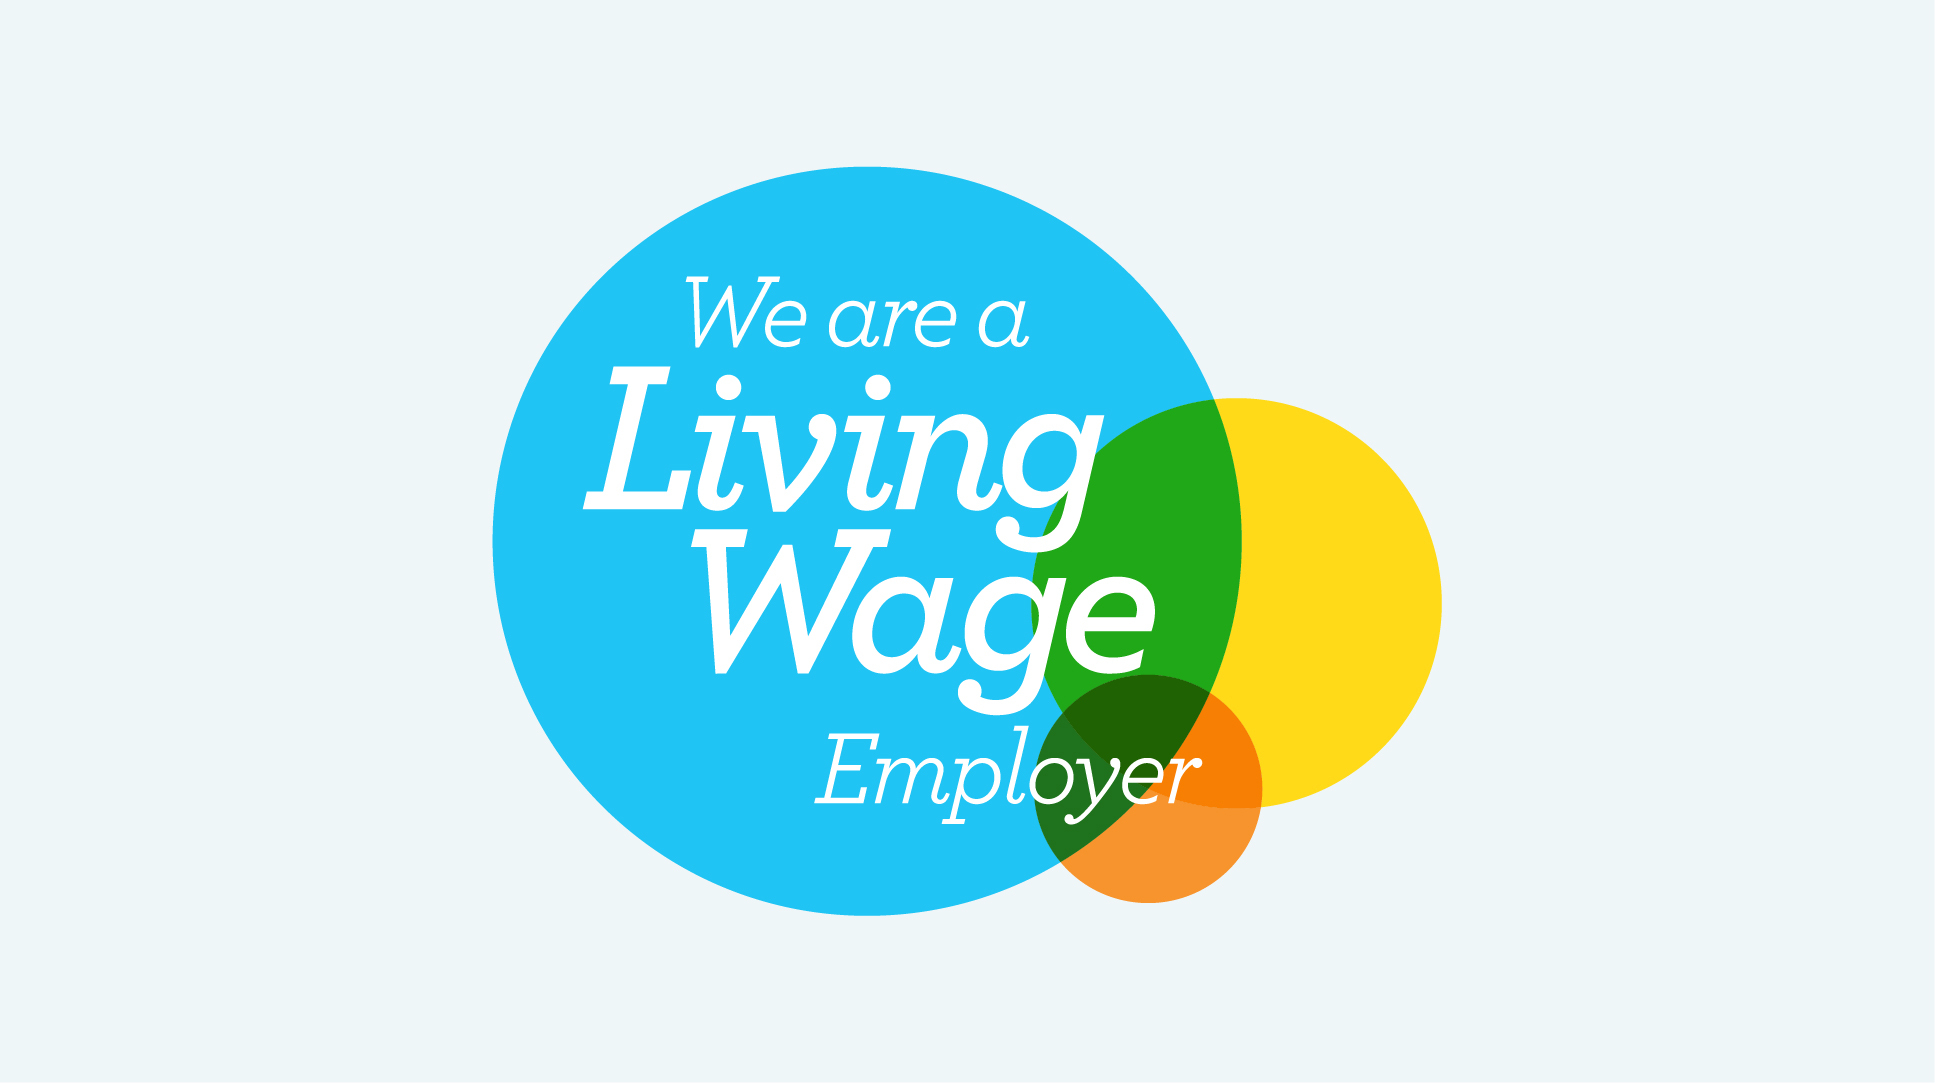 Yoti is now an accredited Living Wage Employer!